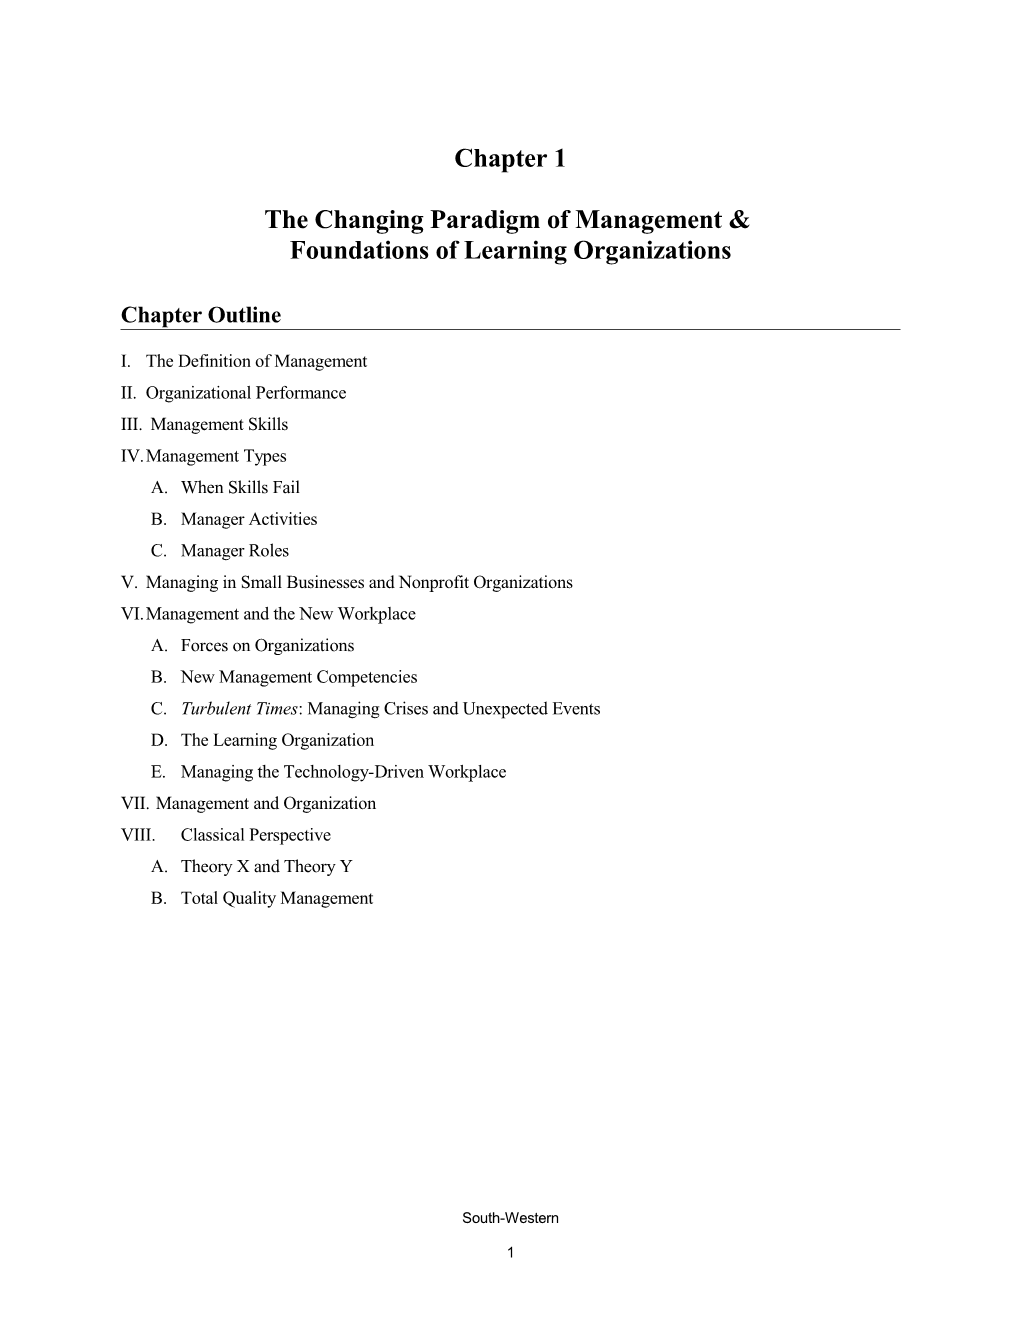 Chapter 1 the Changing Paradigm of Management & Foundations of Learning Organizations